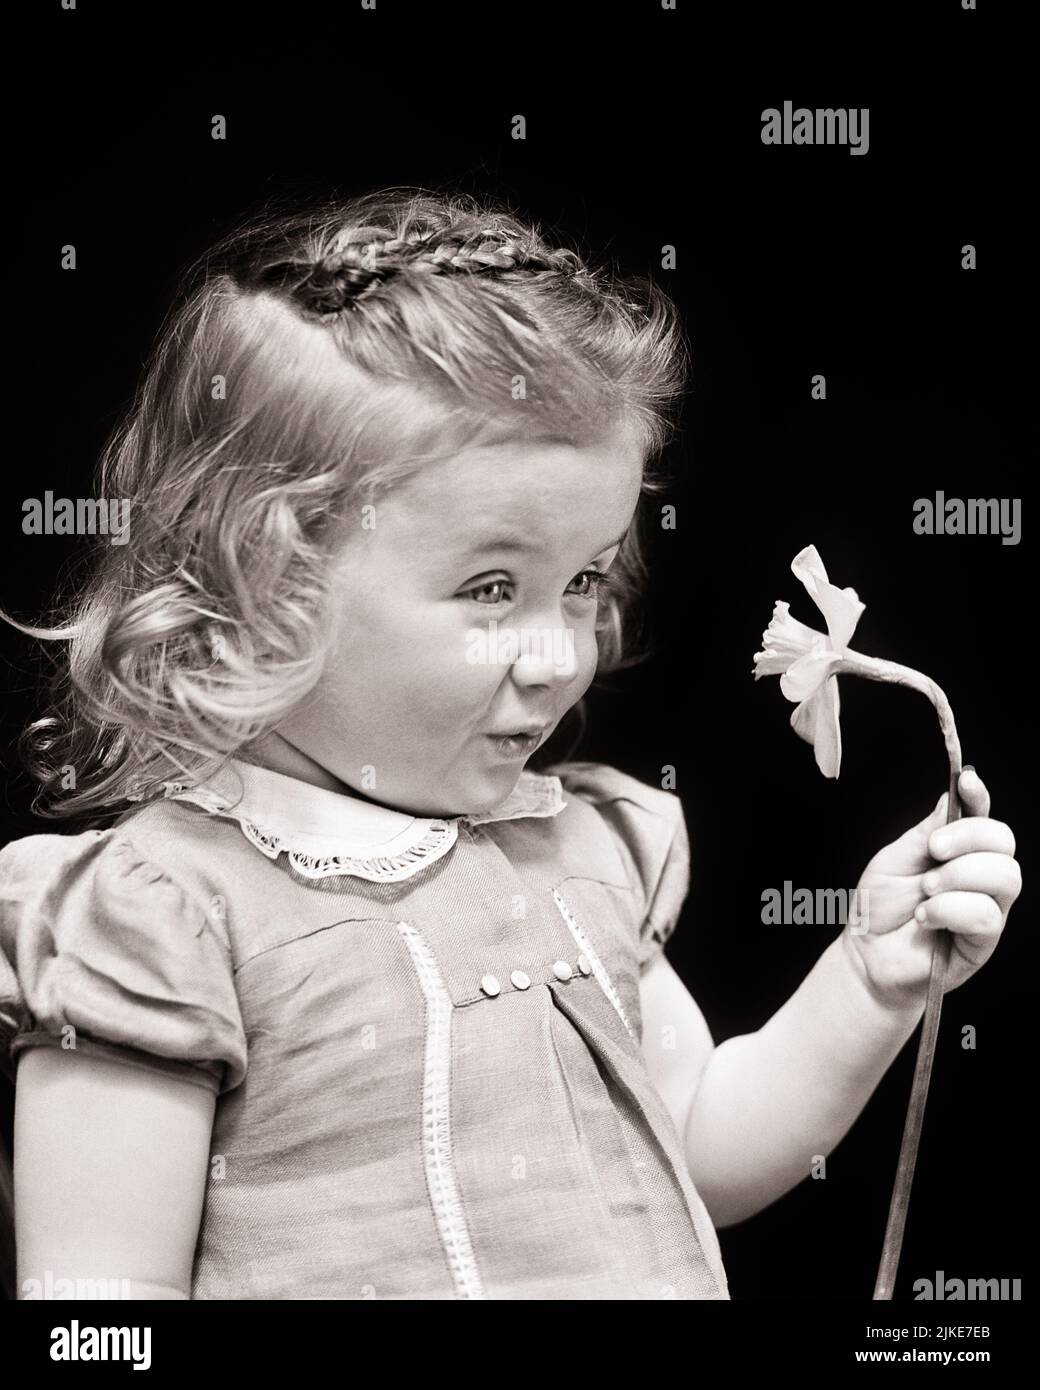 1930s CUTE LITTLE GIRL TODDLER HOLDING A SINGLE DAFFODIL - j1428 HAR001 HARS PLEASANT AGREEABLE BRAIDS CHARMING GROWTH JUVENILES LOVABLE PLEASING ADORABLE APPEALING BABY GIRL BLACK AND WHITE CAUCASIAN ETHNICITY HAR001 OLD FASHIONED Stock Photo